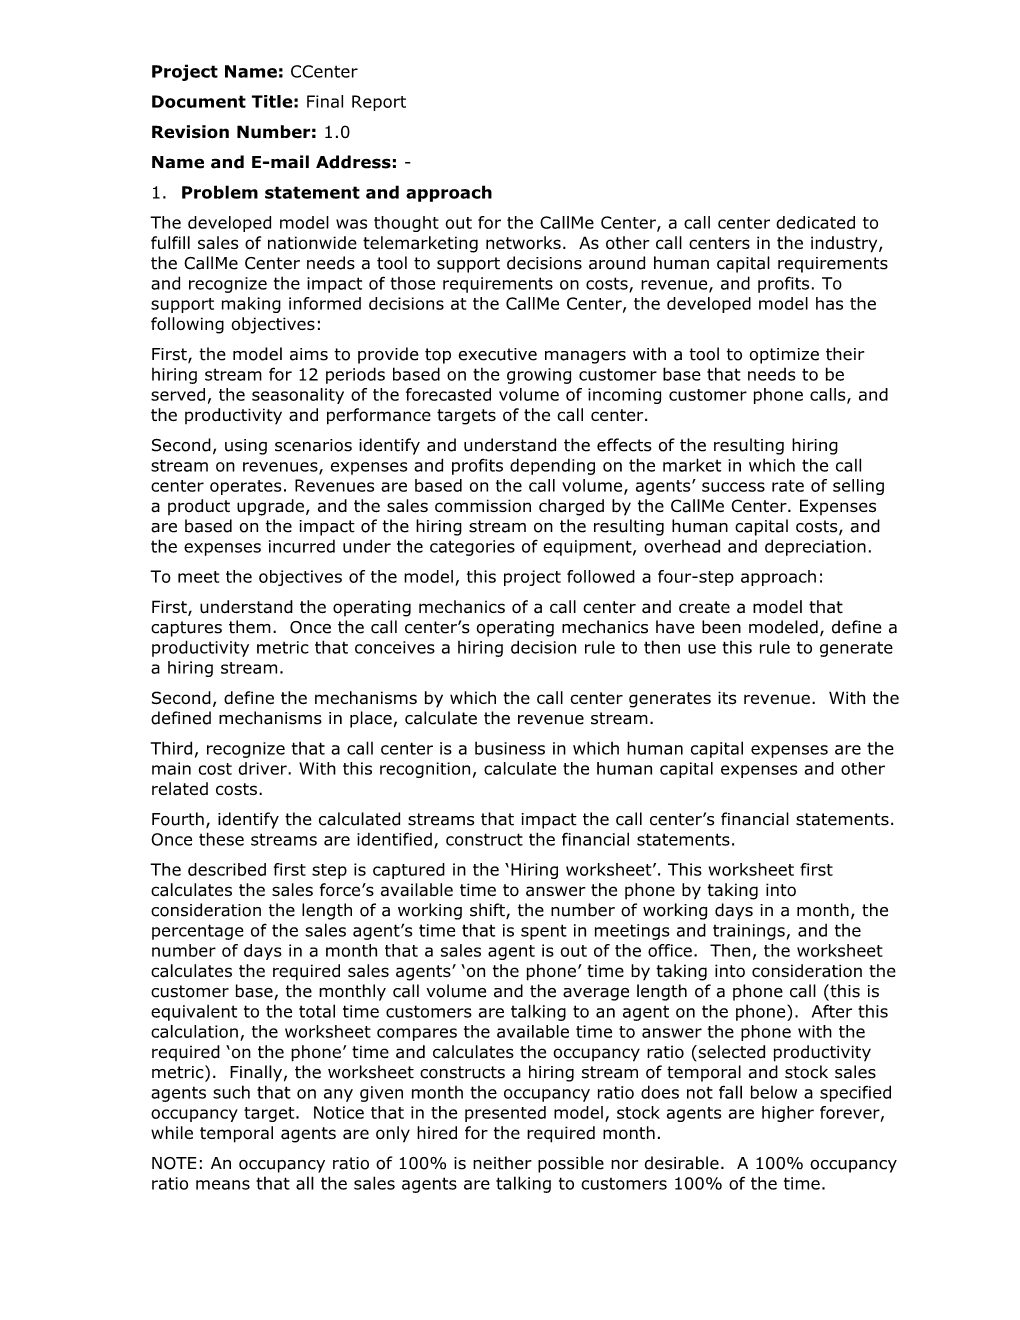 Ccenterfinal Report, Rev 1.0Page 1